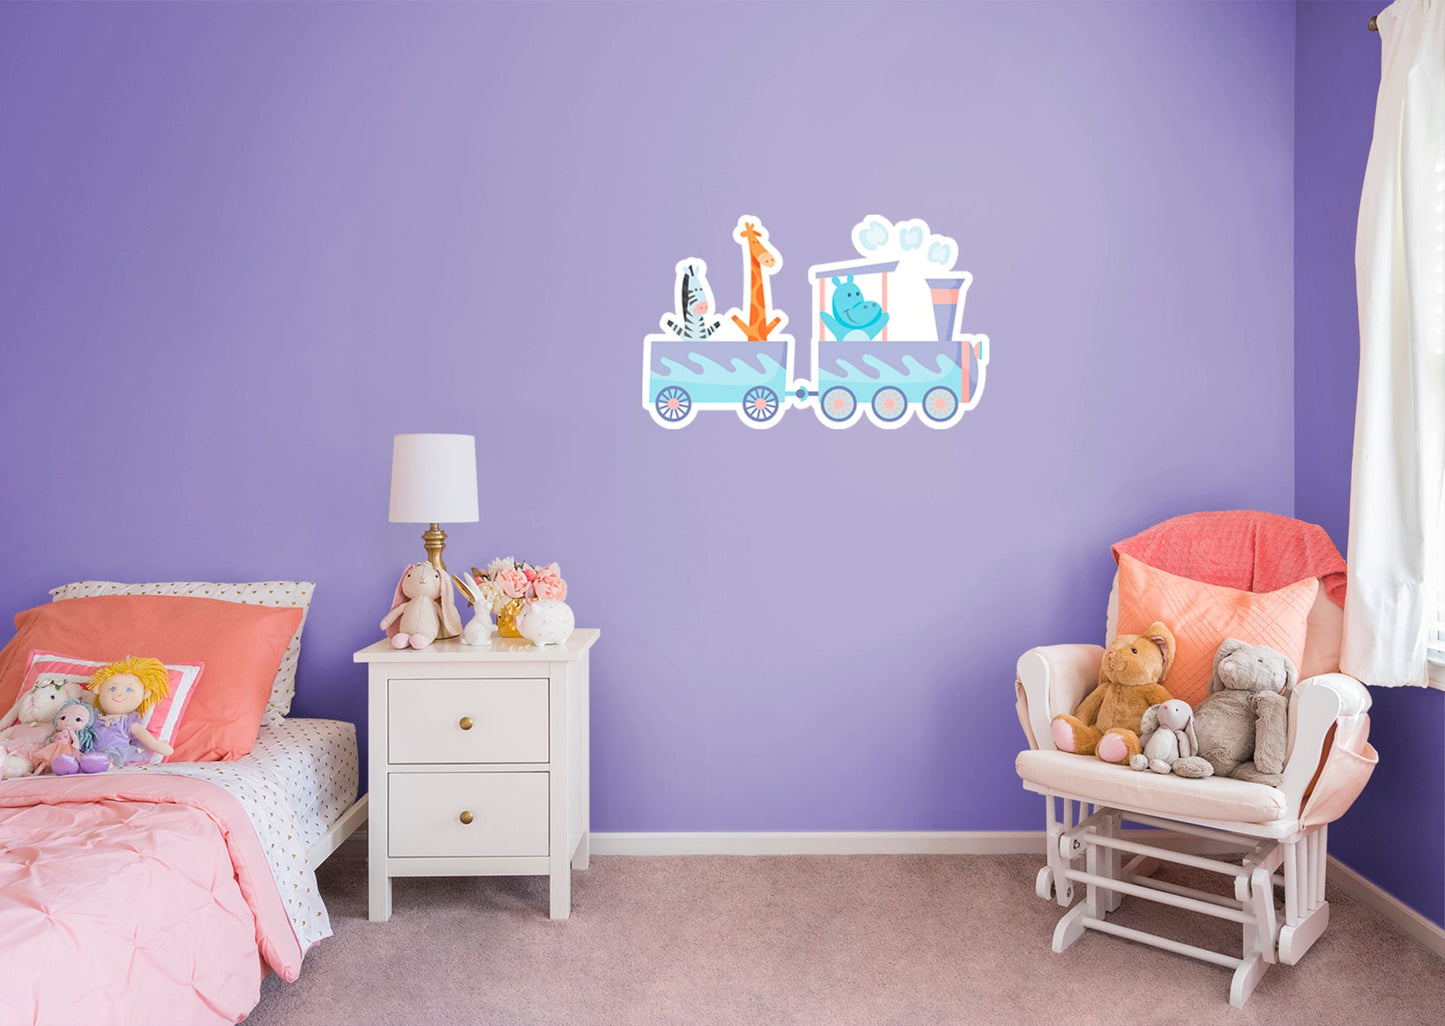 Nursery:  Hipo And Friends Icon        -   Removable Wall   Adhesive Decal